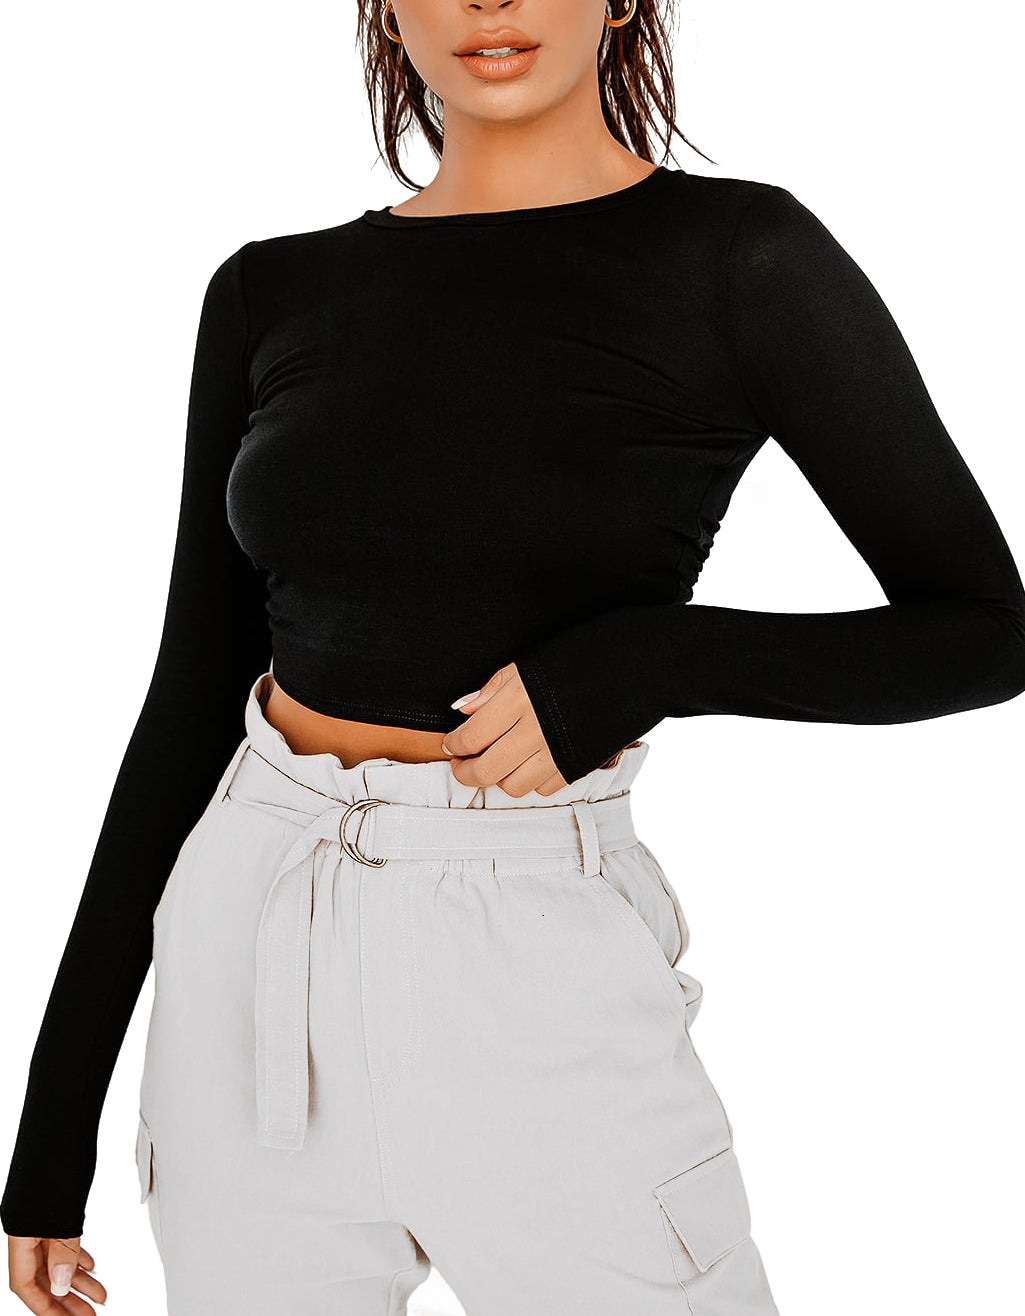 Crop Top With Long Sleeves Sewing Pattern, 8 Sizes XS - 4XL